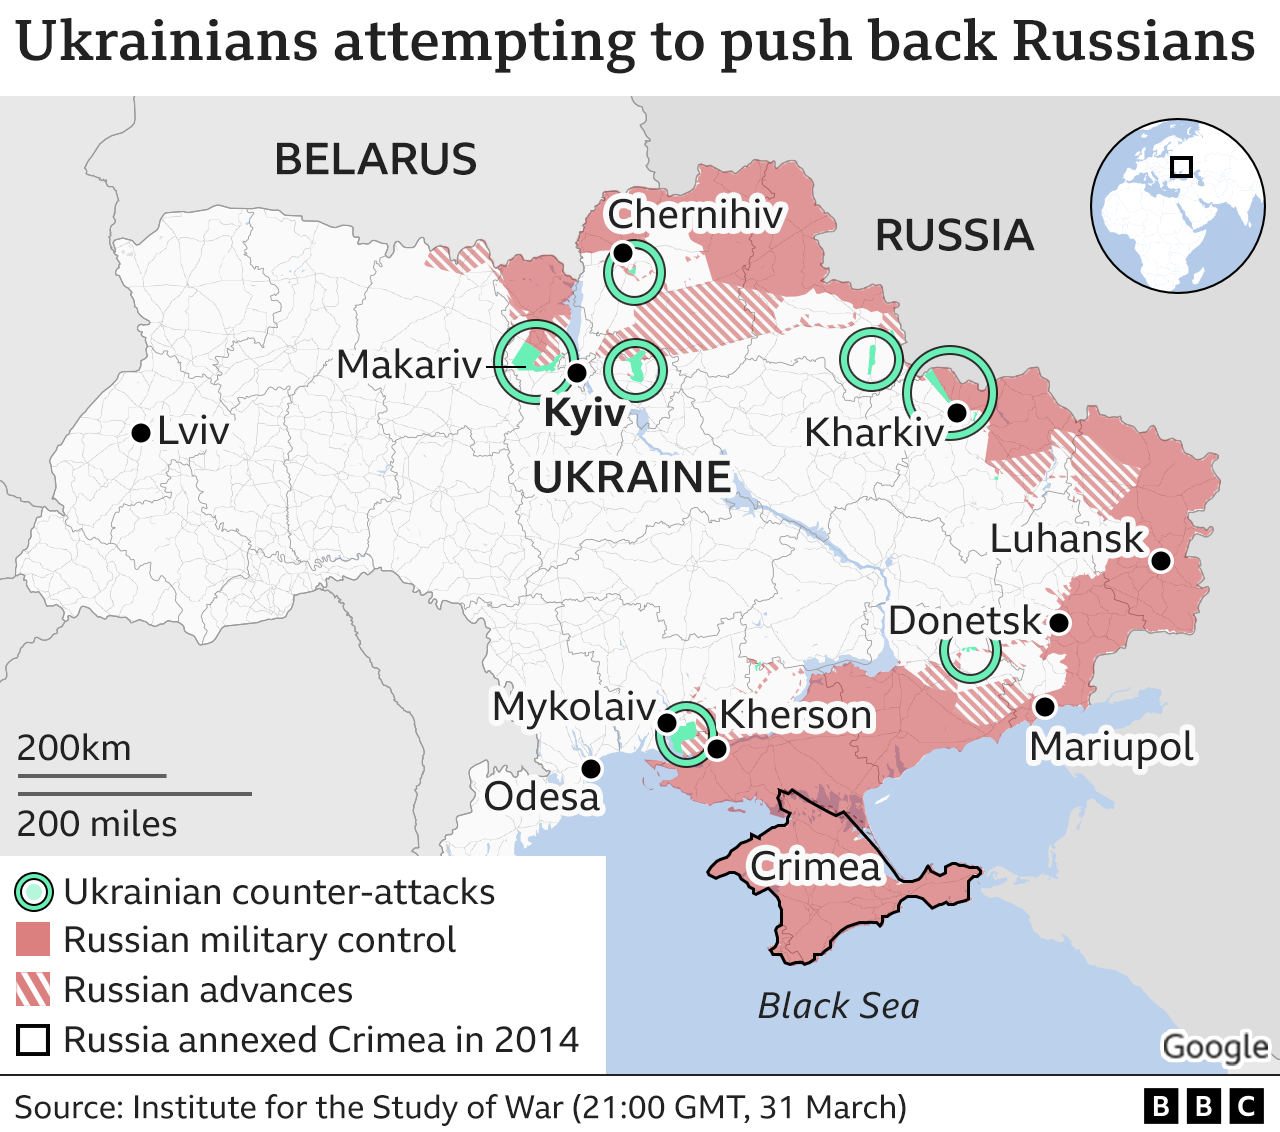 Map showing Russian advances and Ukrainian counter-attacks